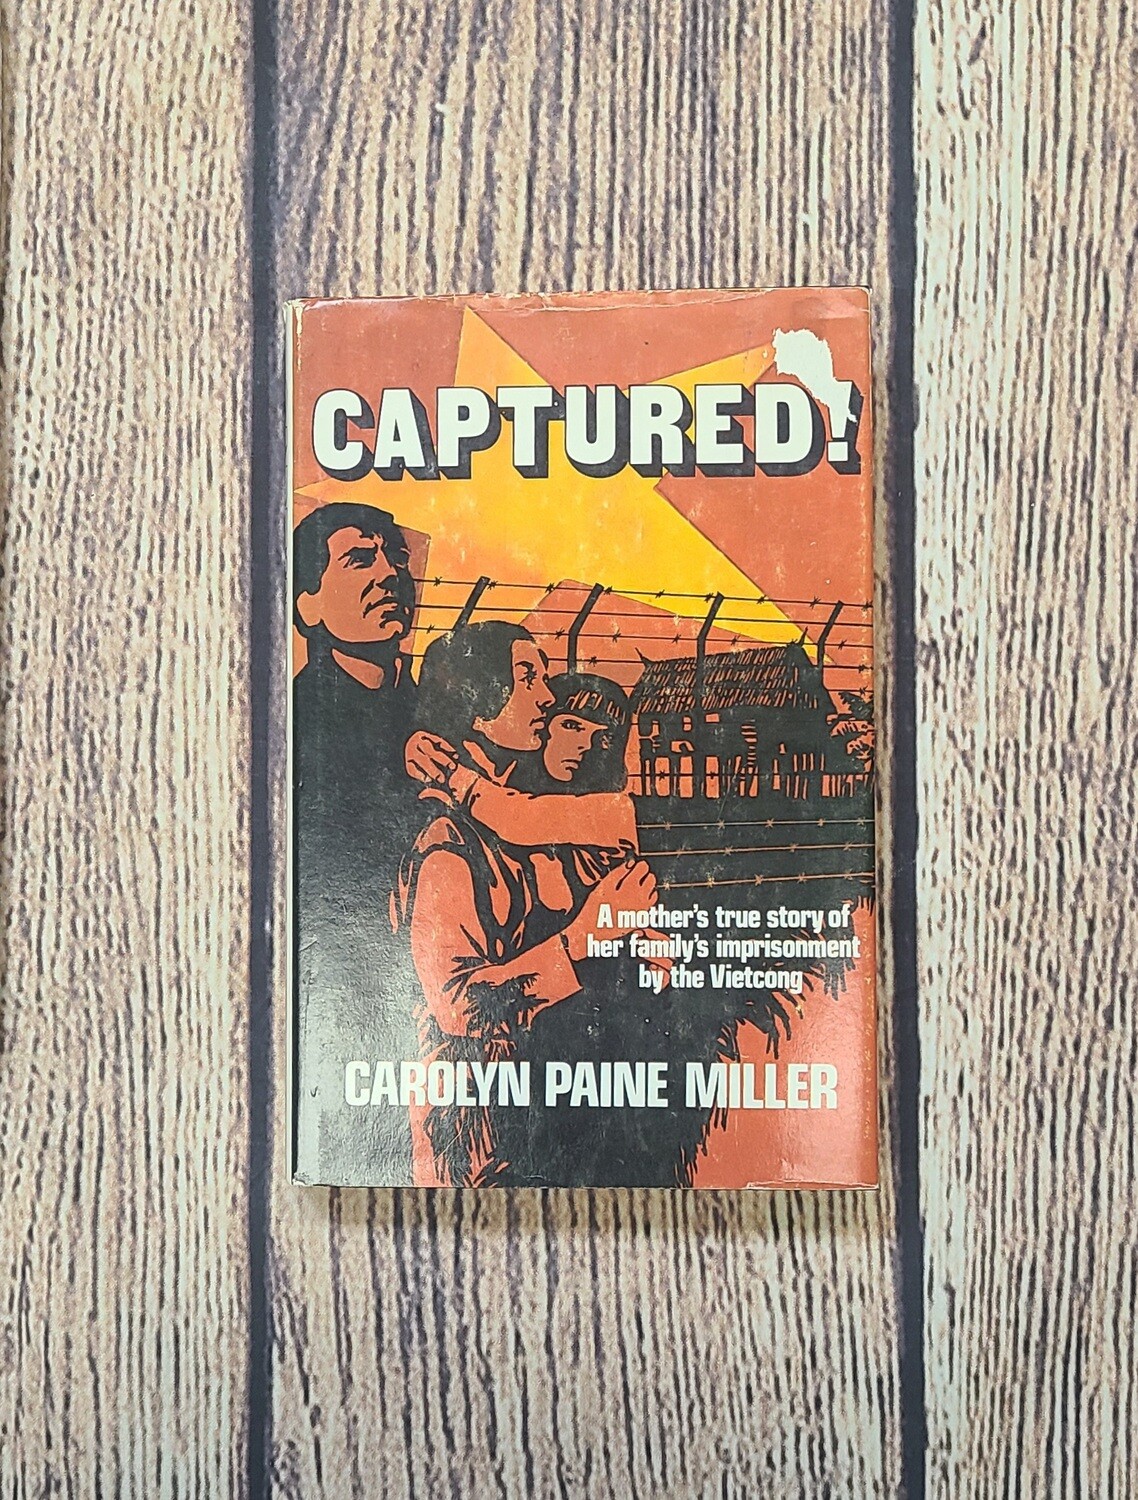 Captured! by Carolyn Paine Miller